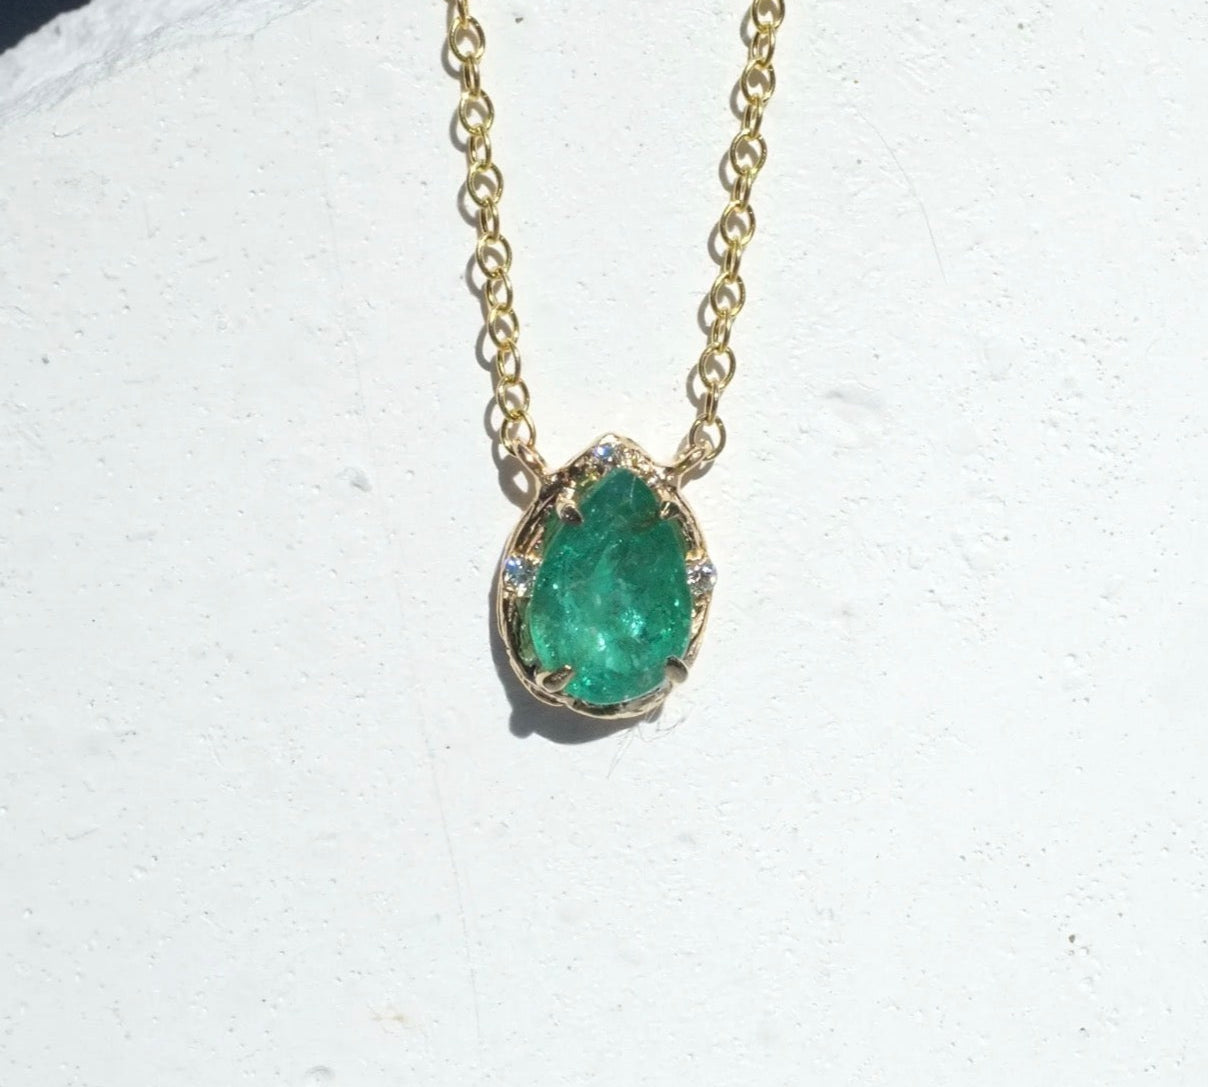 Small Emerald Pear Necklace Pendant Elisabeth Bell Jewelry   